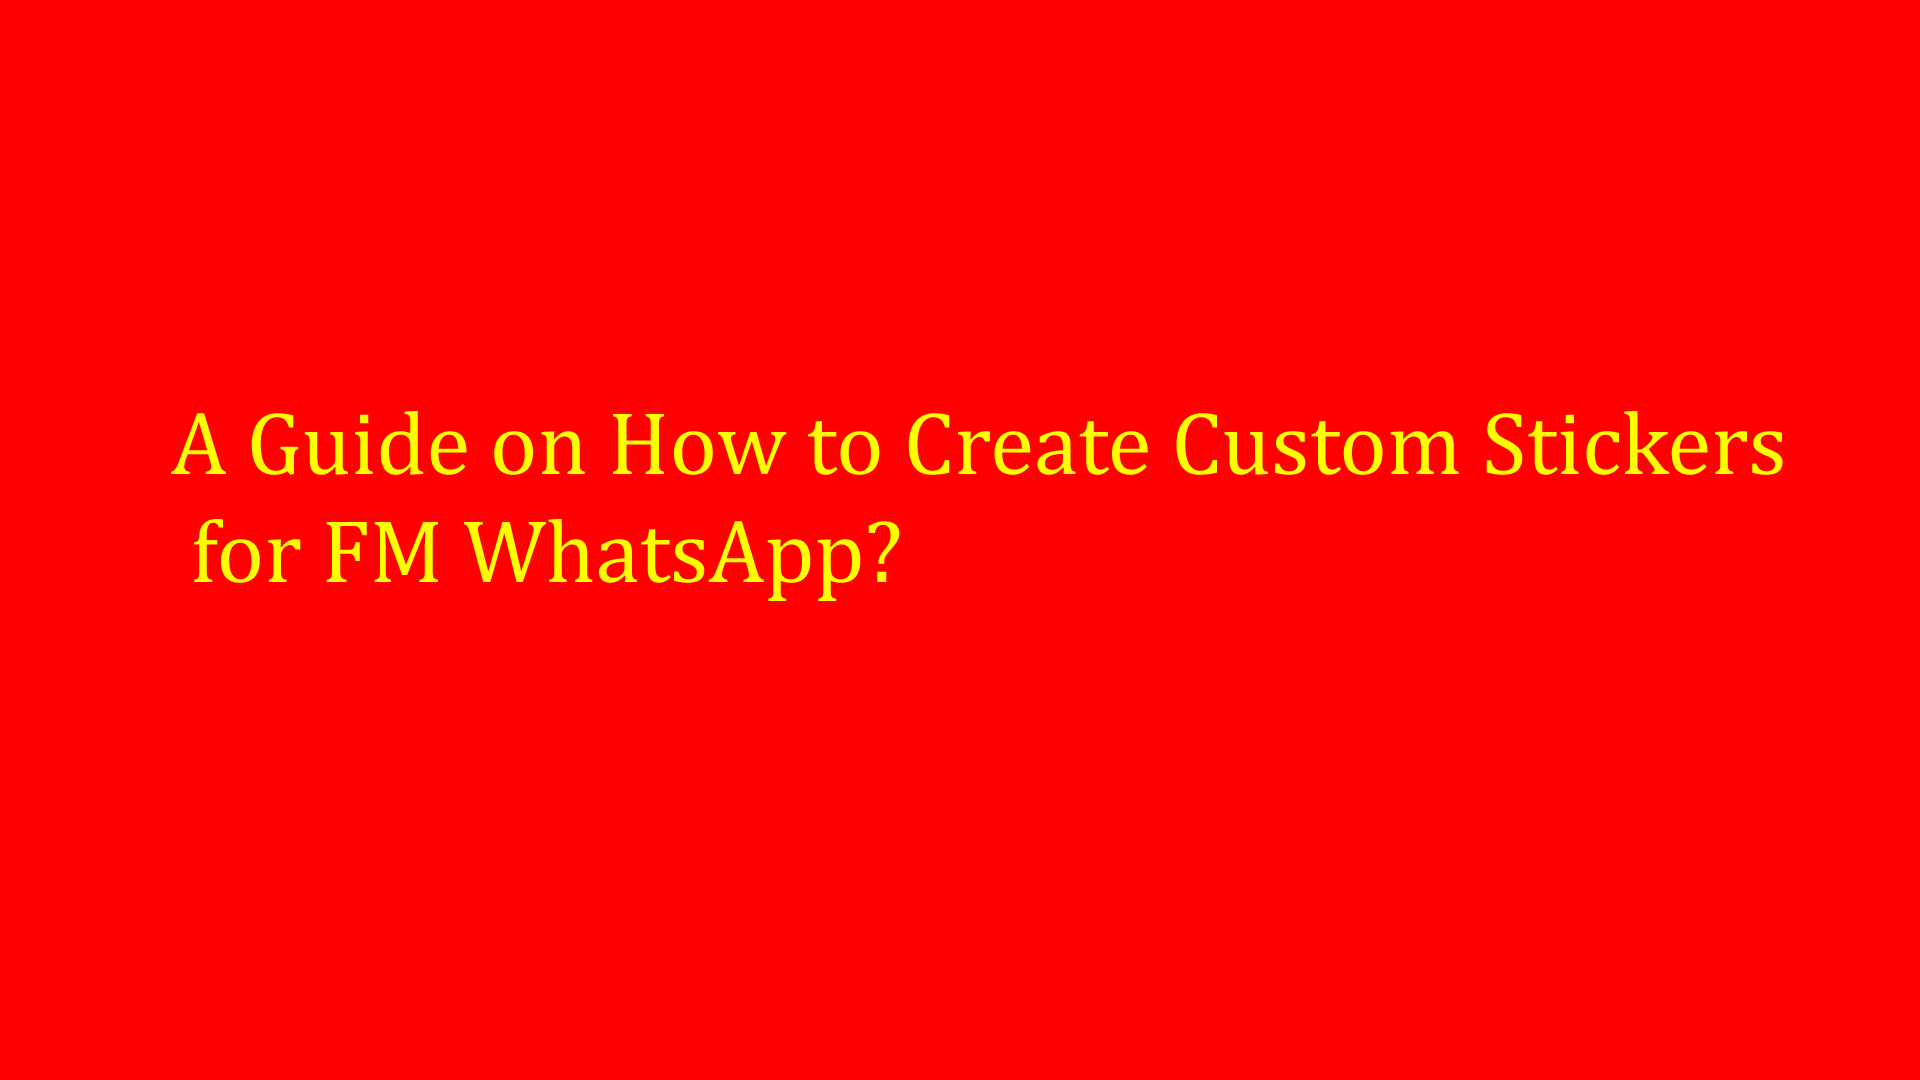 A Guide on How to Create Custom FM WhatsApp Stickers?